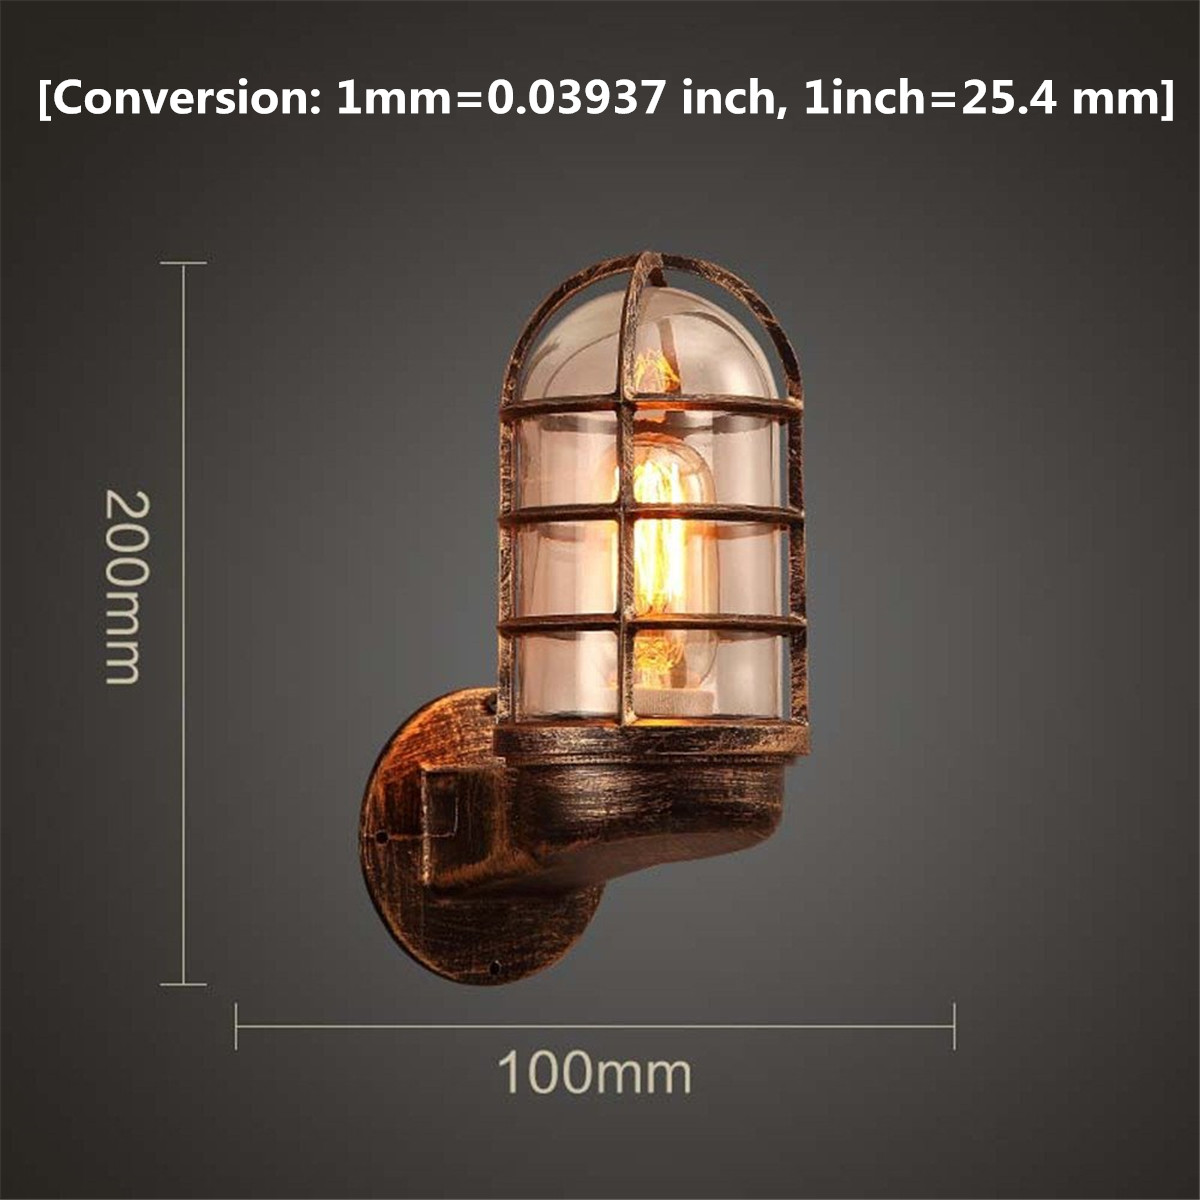 Vintage-Industrial-Unique-Wall-Lamp-Iron-Rustic-Copper-Steampunk-Lamp-Sconce-1635620-2